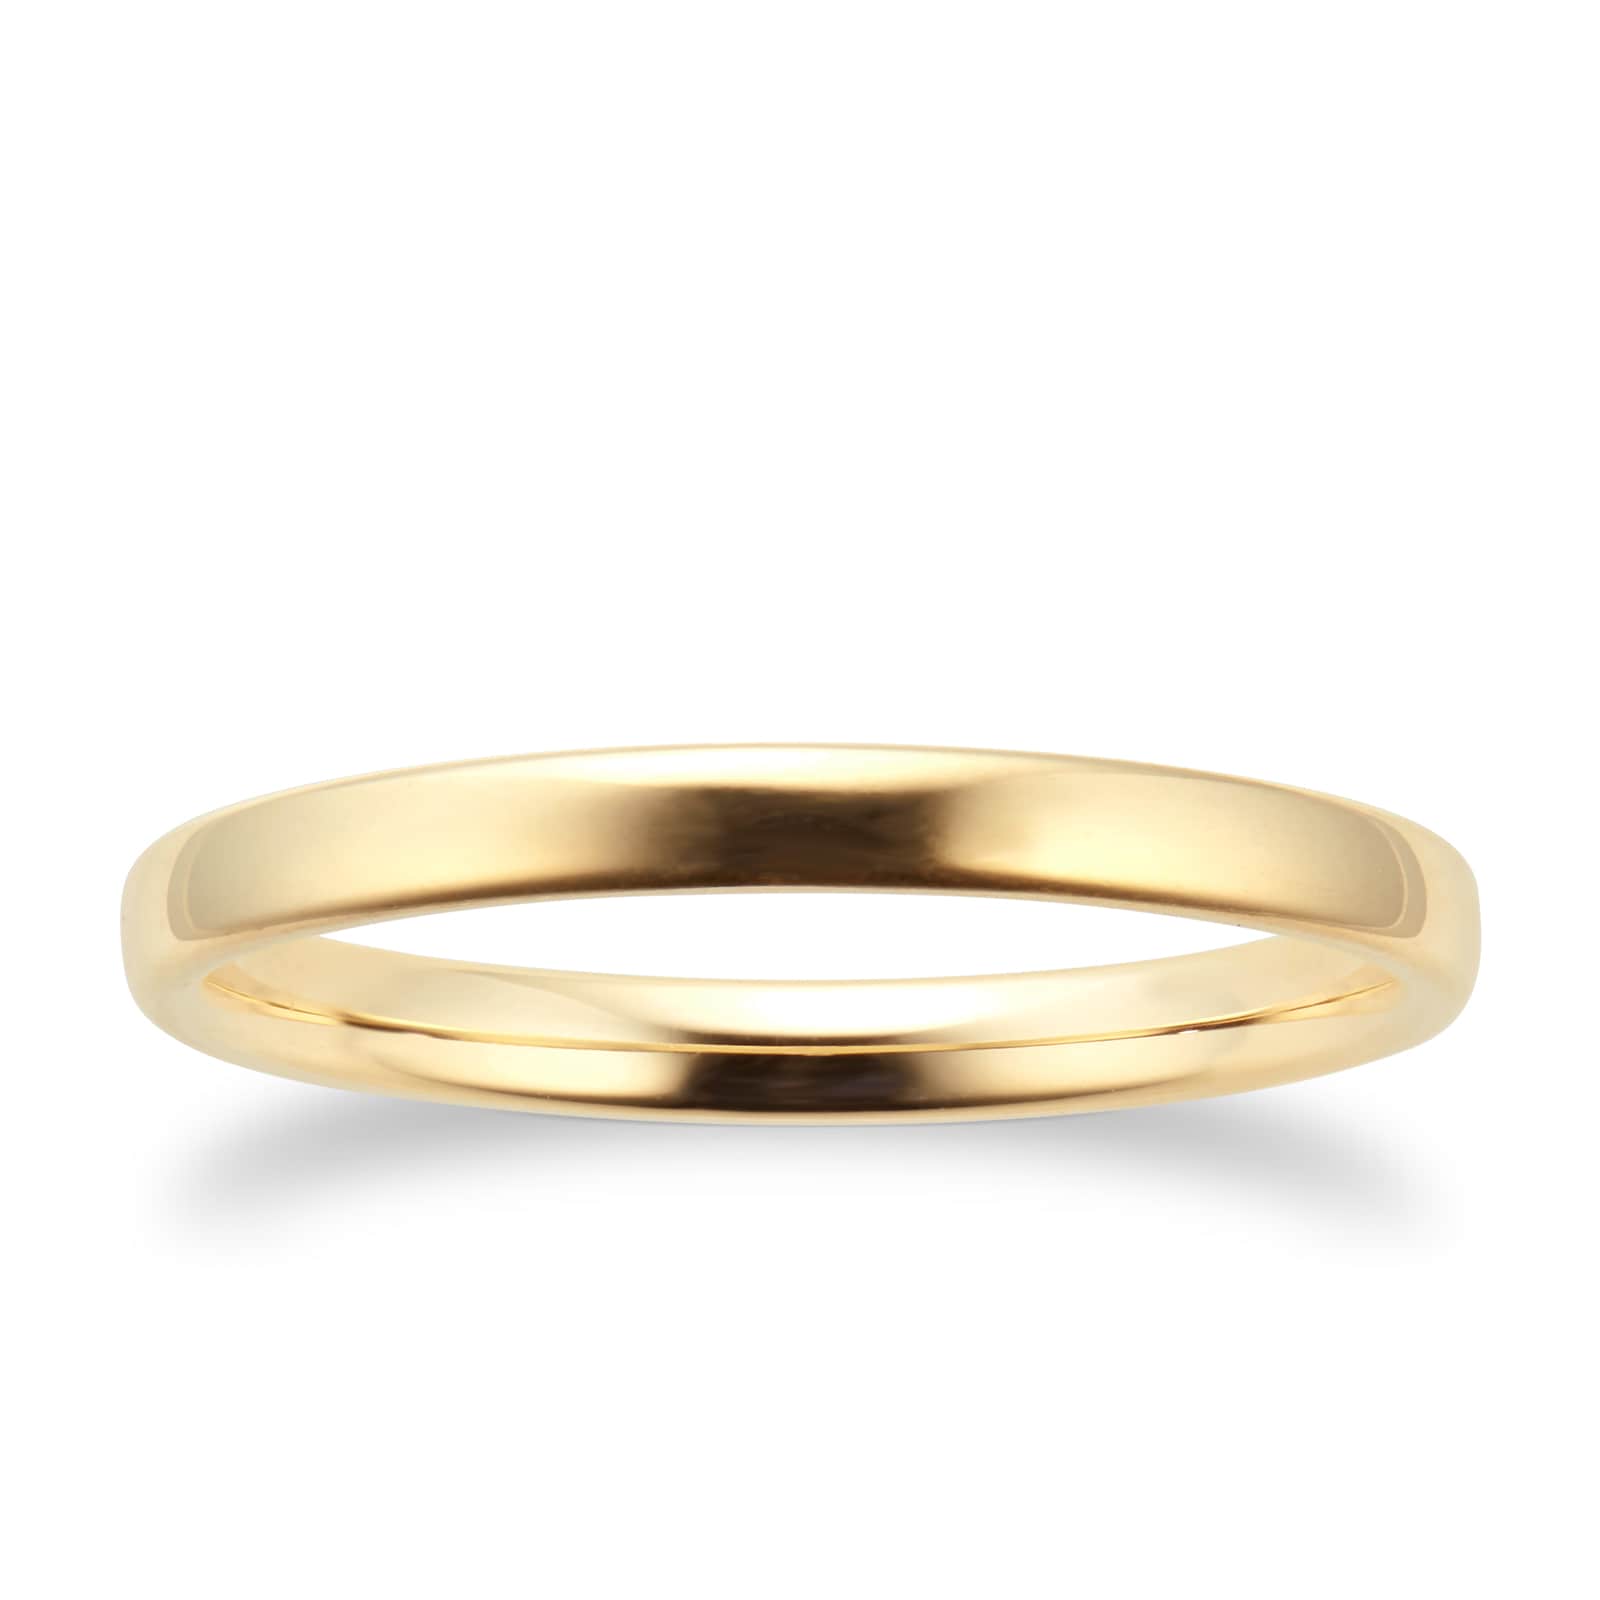 2mm Slight Court Standard Wedding Ring In 9 Carat Yellow Gold Ring Size L